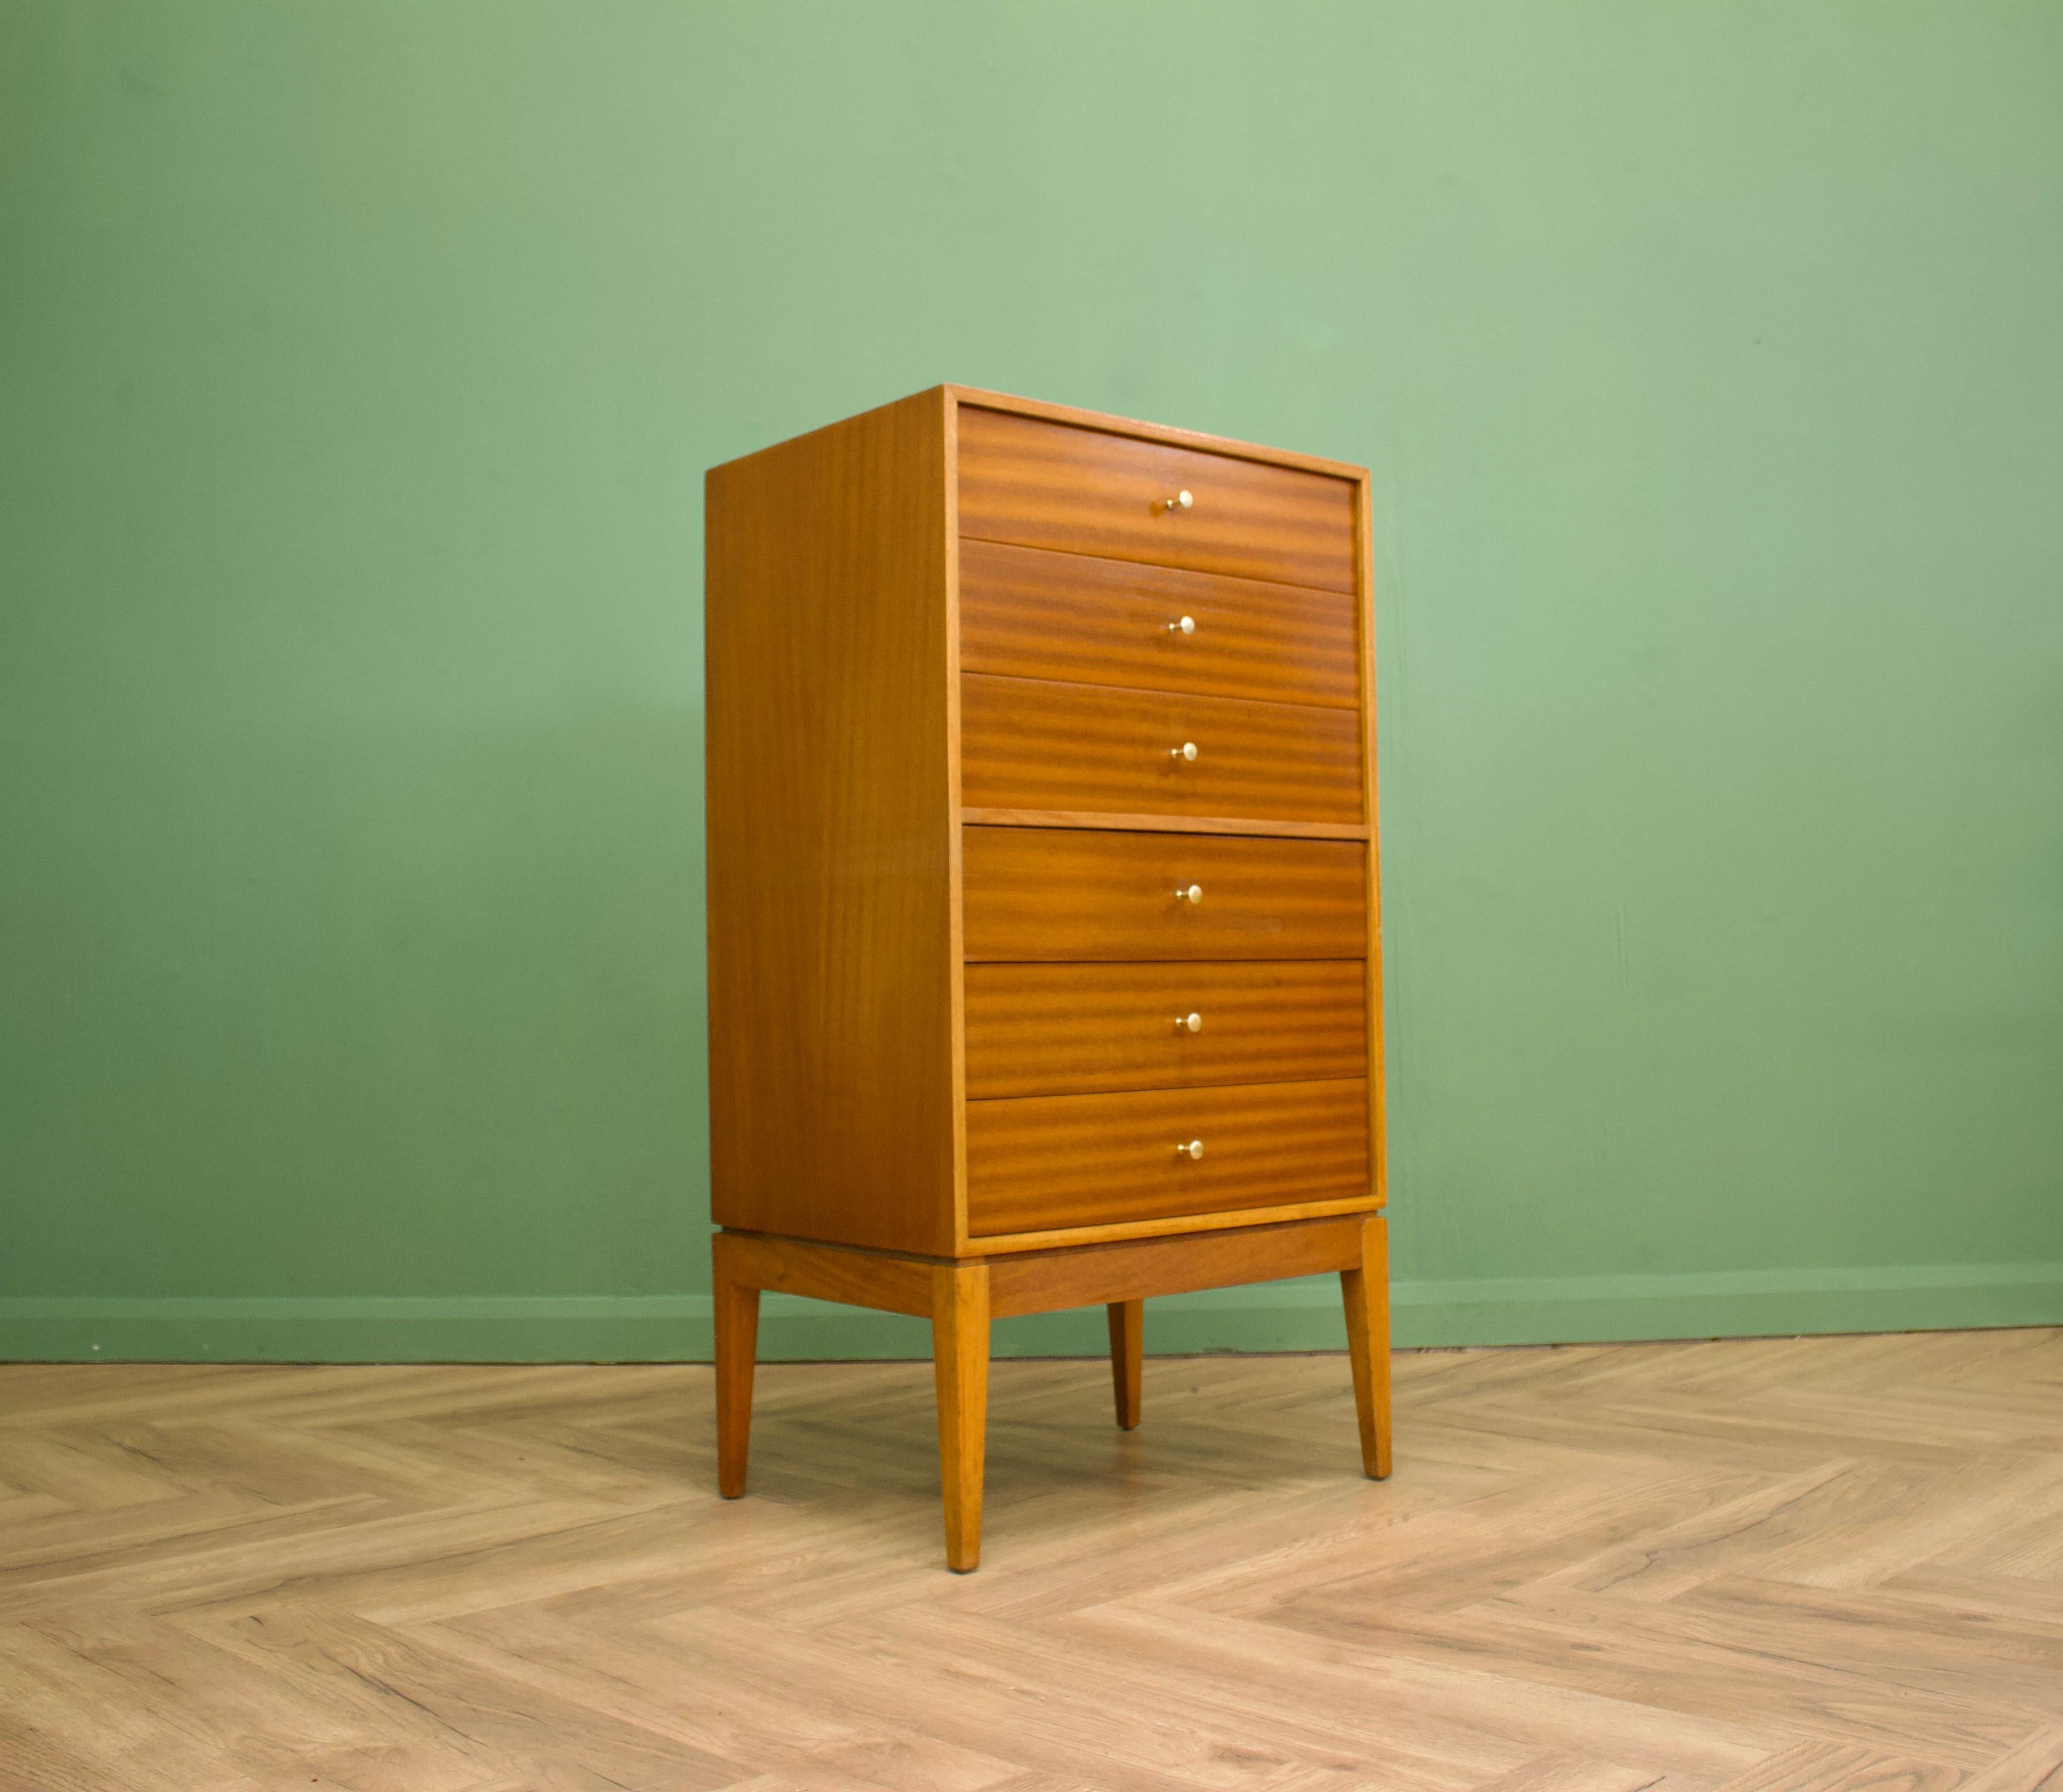 - Mid century chest of drawers
- Manufactured in the UK by Uniflex
- Designed by Peter Hayward
- Made from teak and teak veneer.